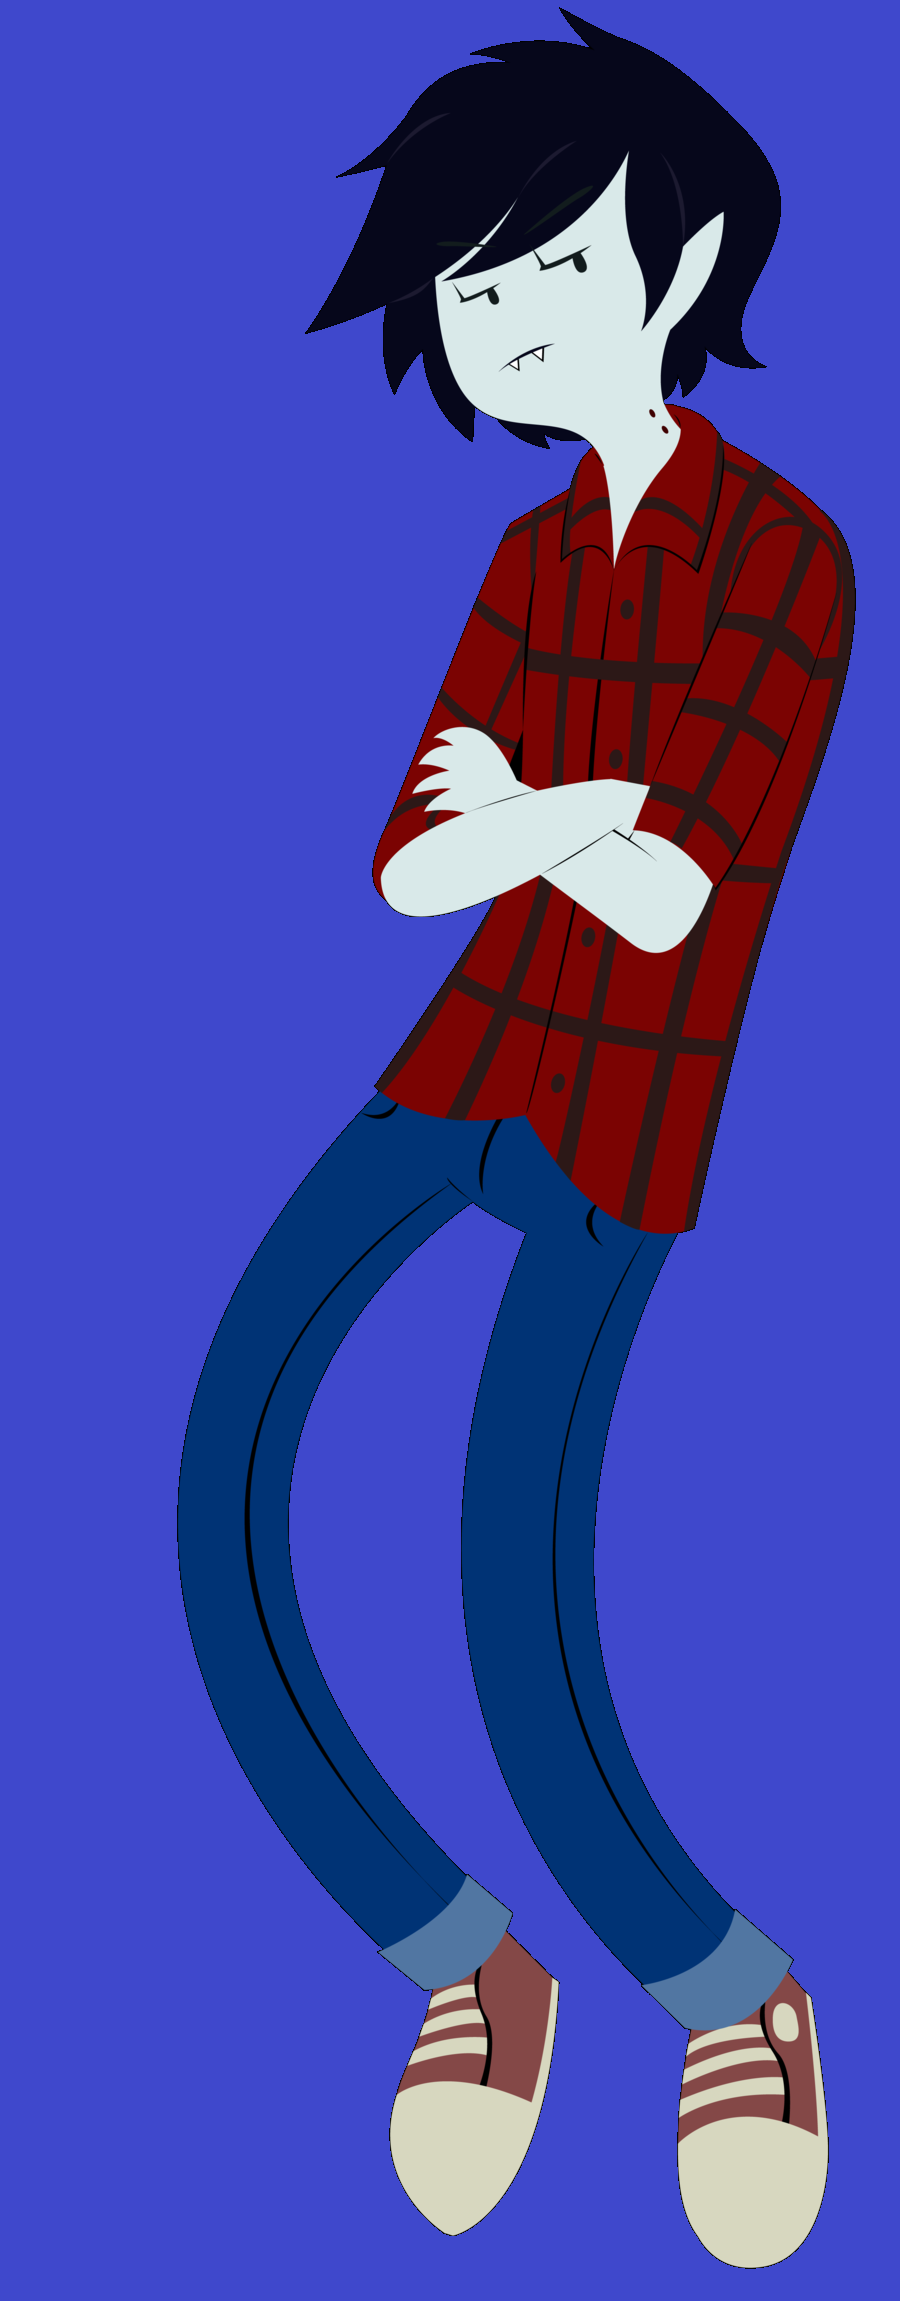 Image Marshall Lee Png Adventure Time Wiki Fandom Powered By Wikia